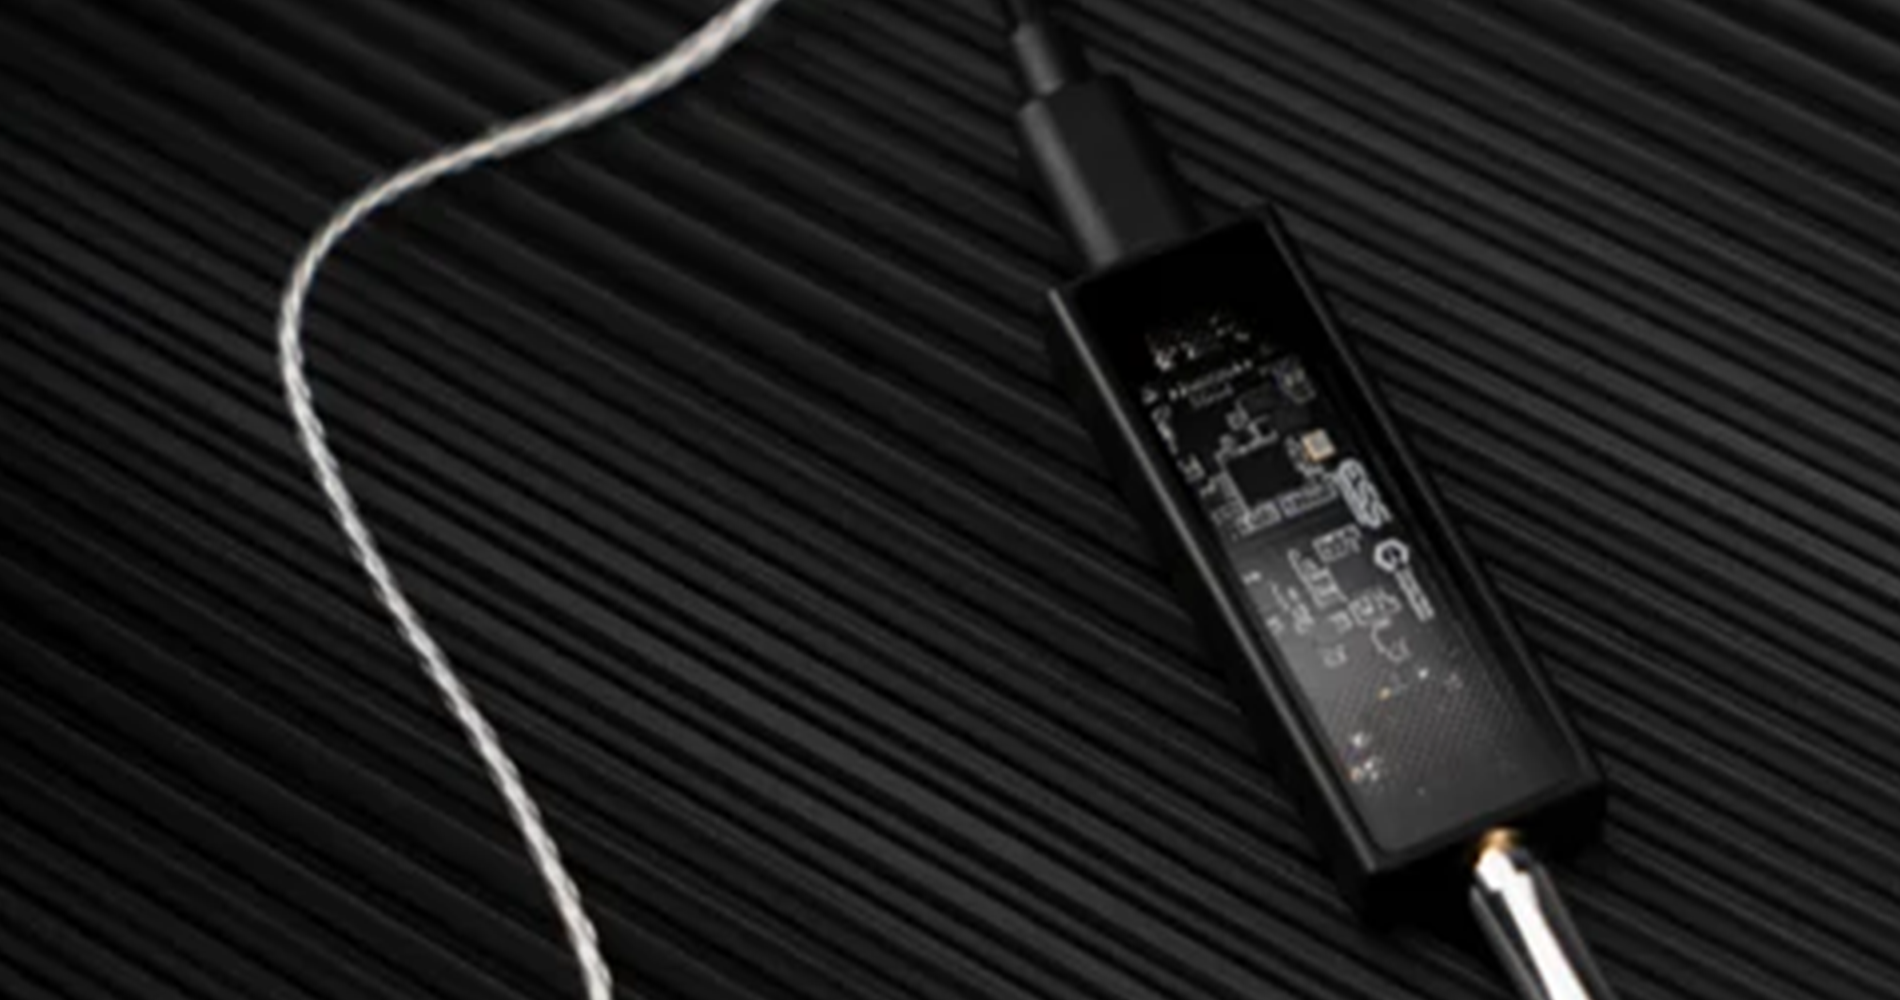 Questyle M12i Portable DAC/Amp In Use